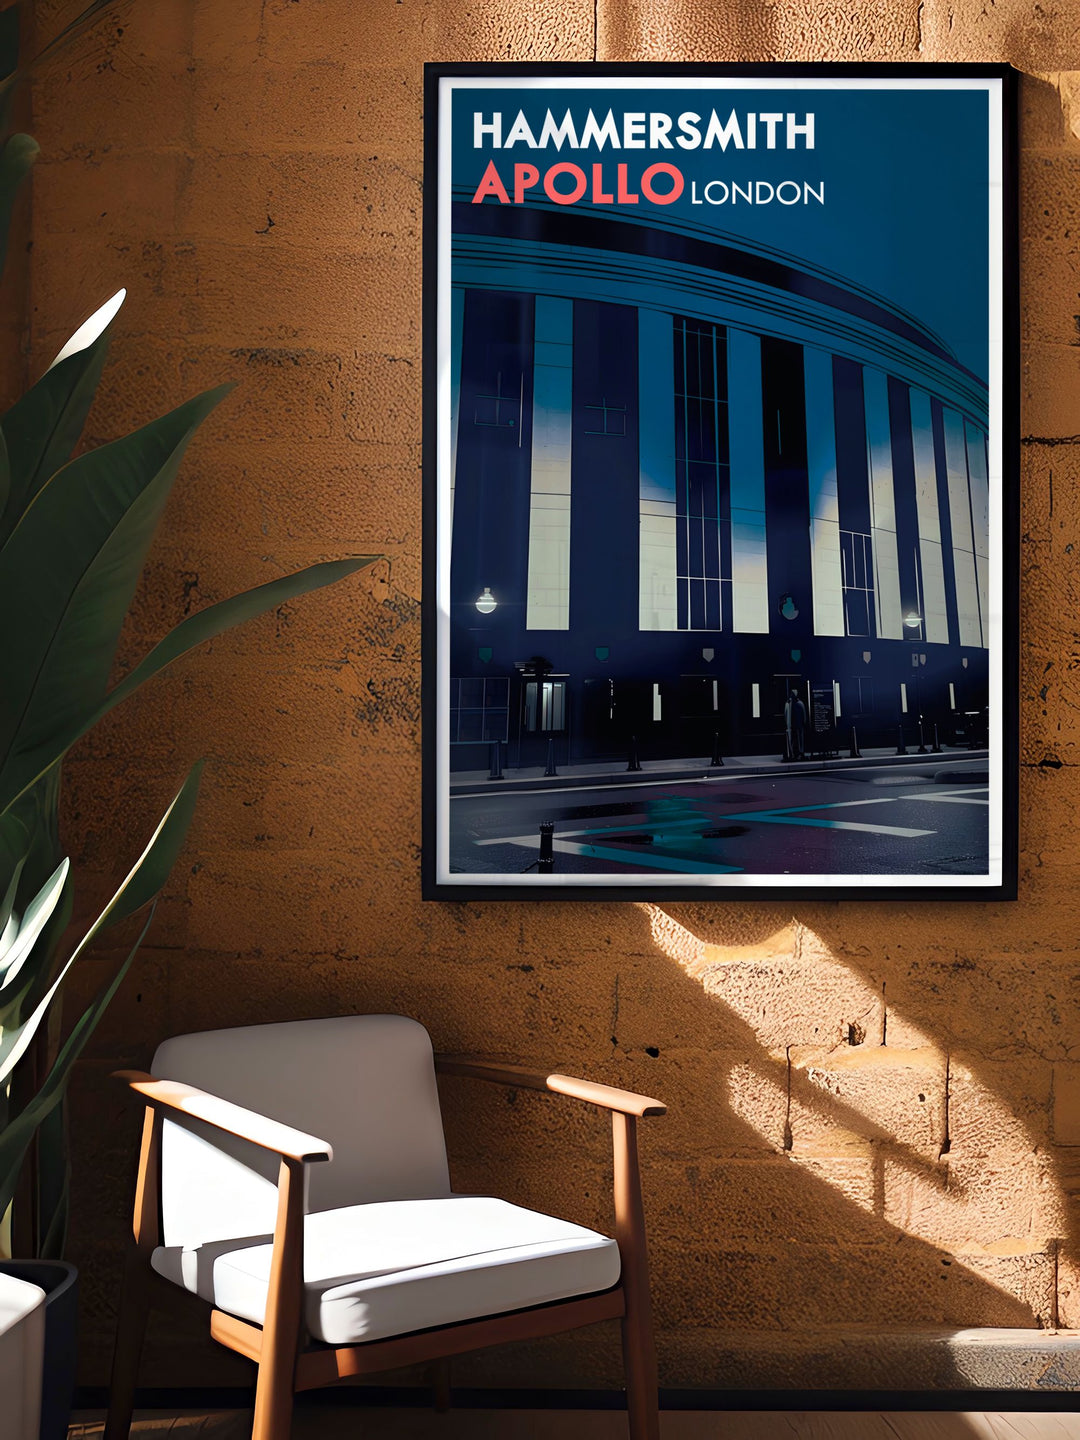 An intricate depiction of Hammersmith Apollo, this art print showcases the venues bold geometric design and historic charm, perfect for adding a touch of Art Deco to your decor.